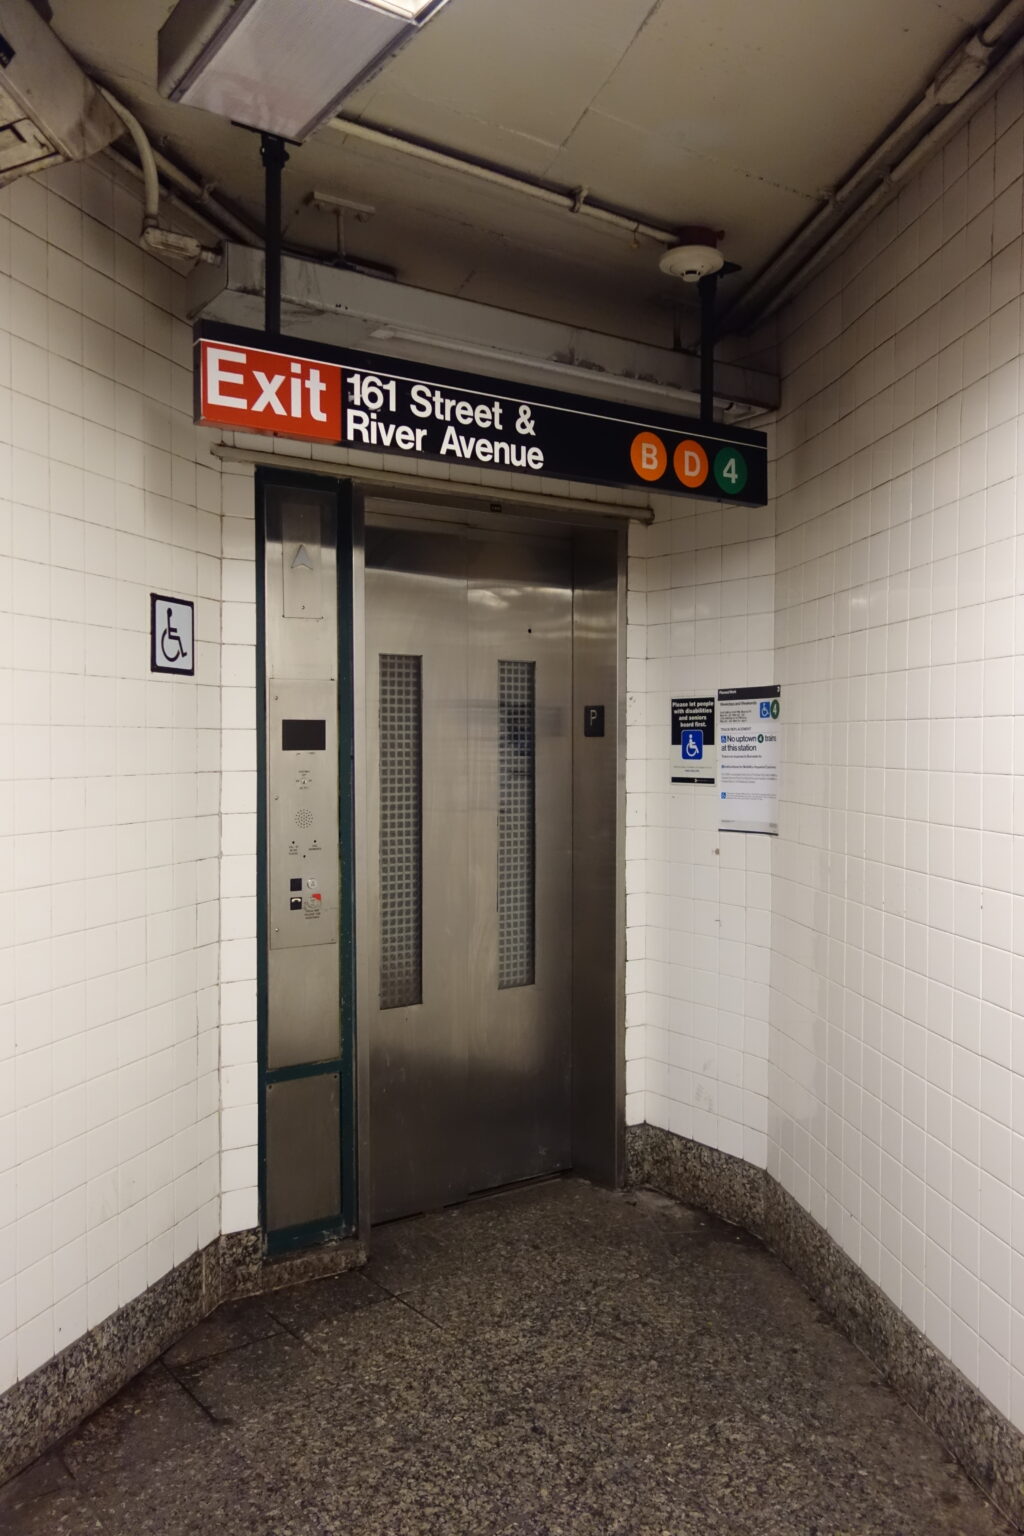 Out-of-service elevators are just one of many reasons why disabled people have asked for the kind of work-from-home accommodations many people have now. Source: Tdorante10, CC BY-SA 4.0, https://commons.wikimedia.org/w/index.php?curid=68291195